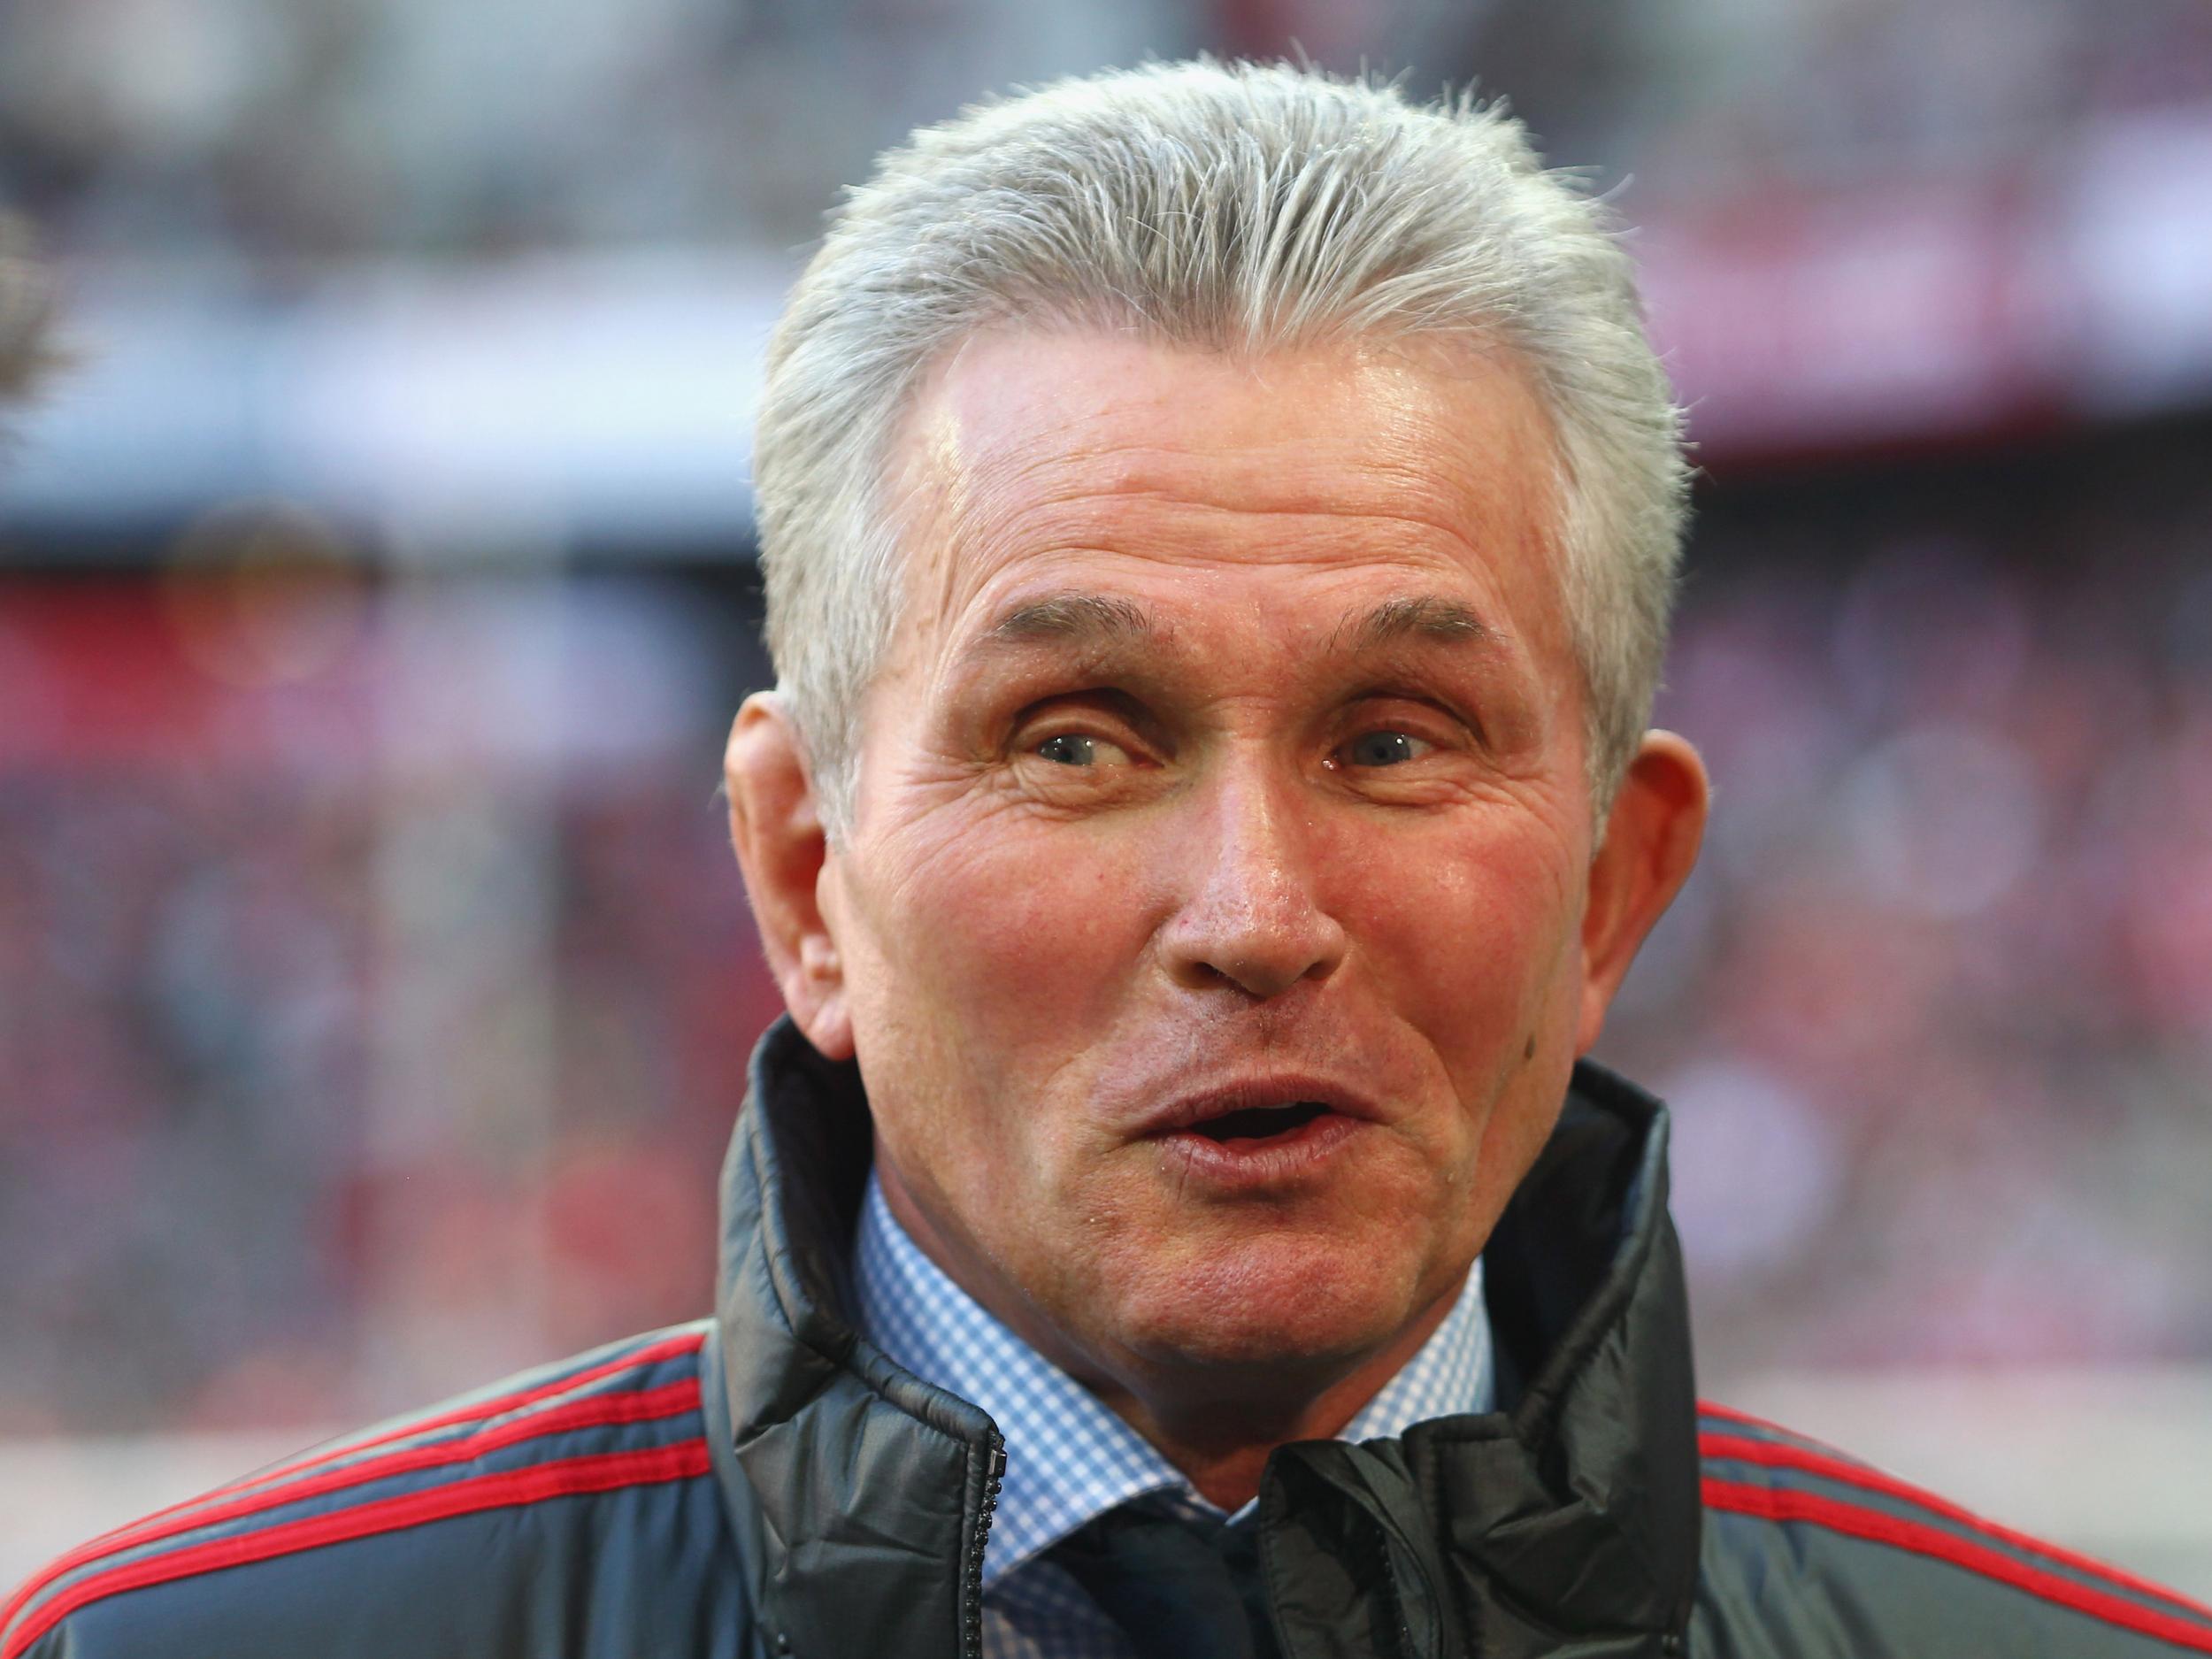 Jupp Heynckes confirms Bayern Munich have approached him about taking